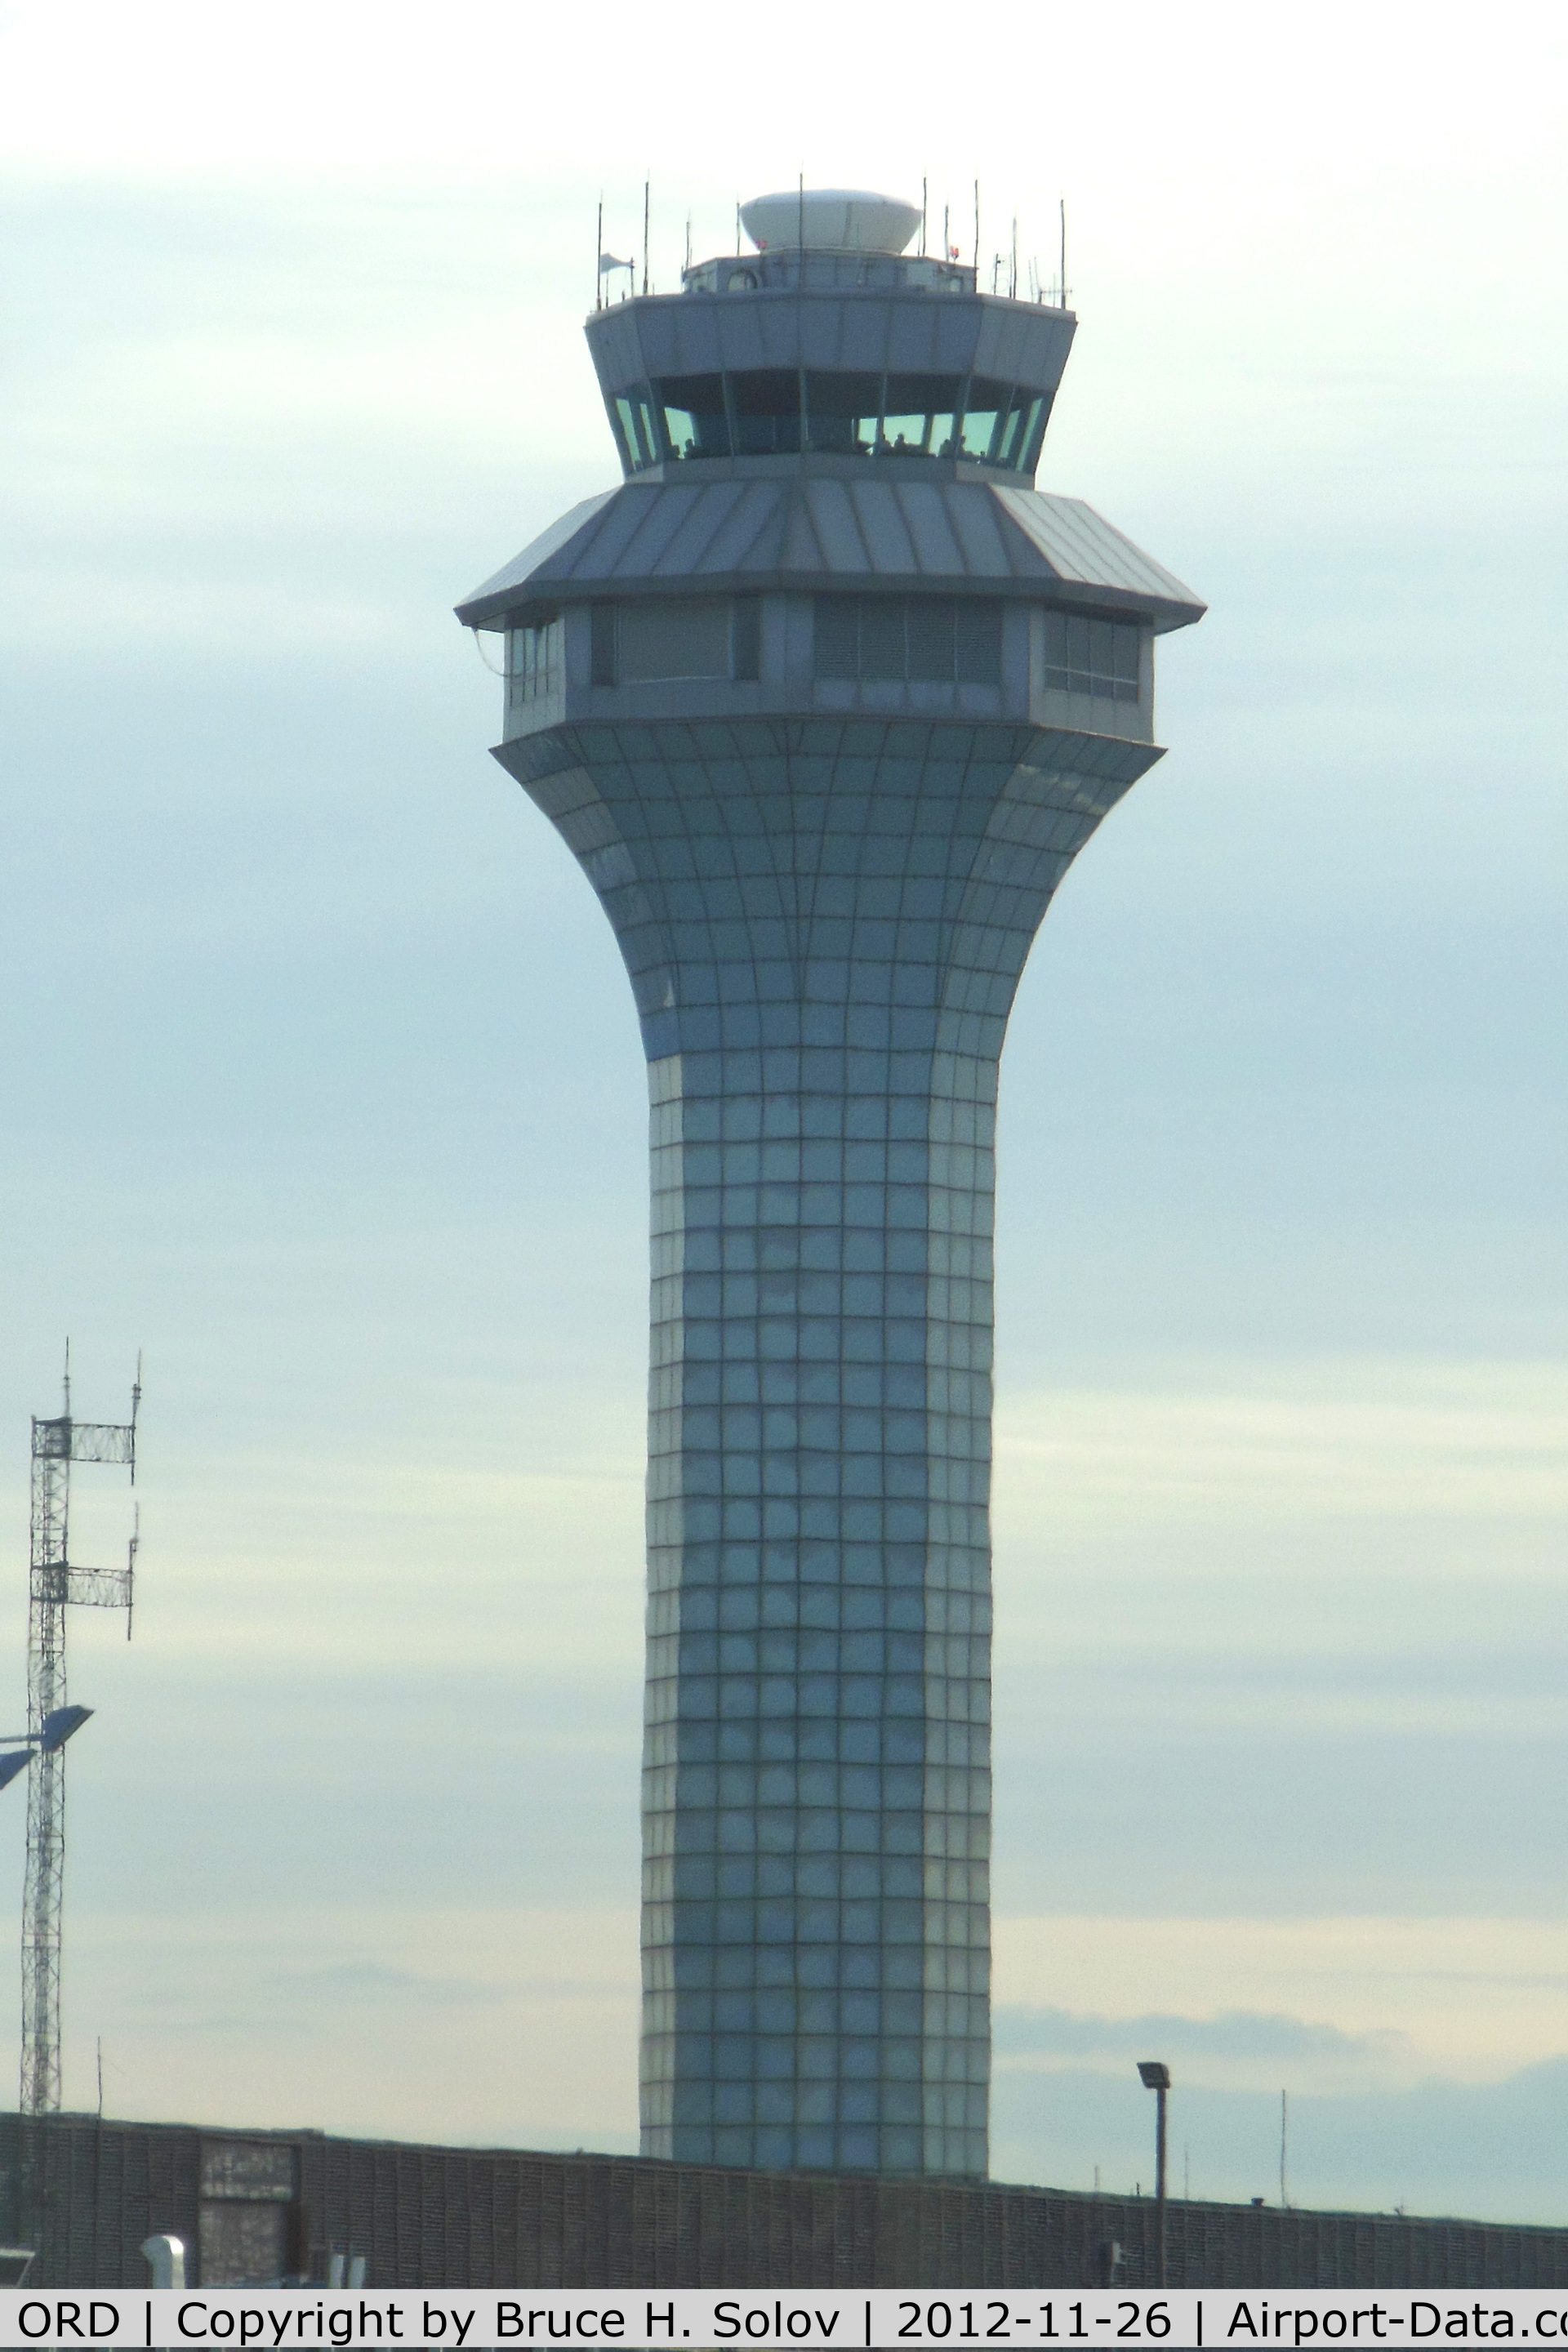 Chicago O'hare International Airport (ORD) - ATC tower at ORD